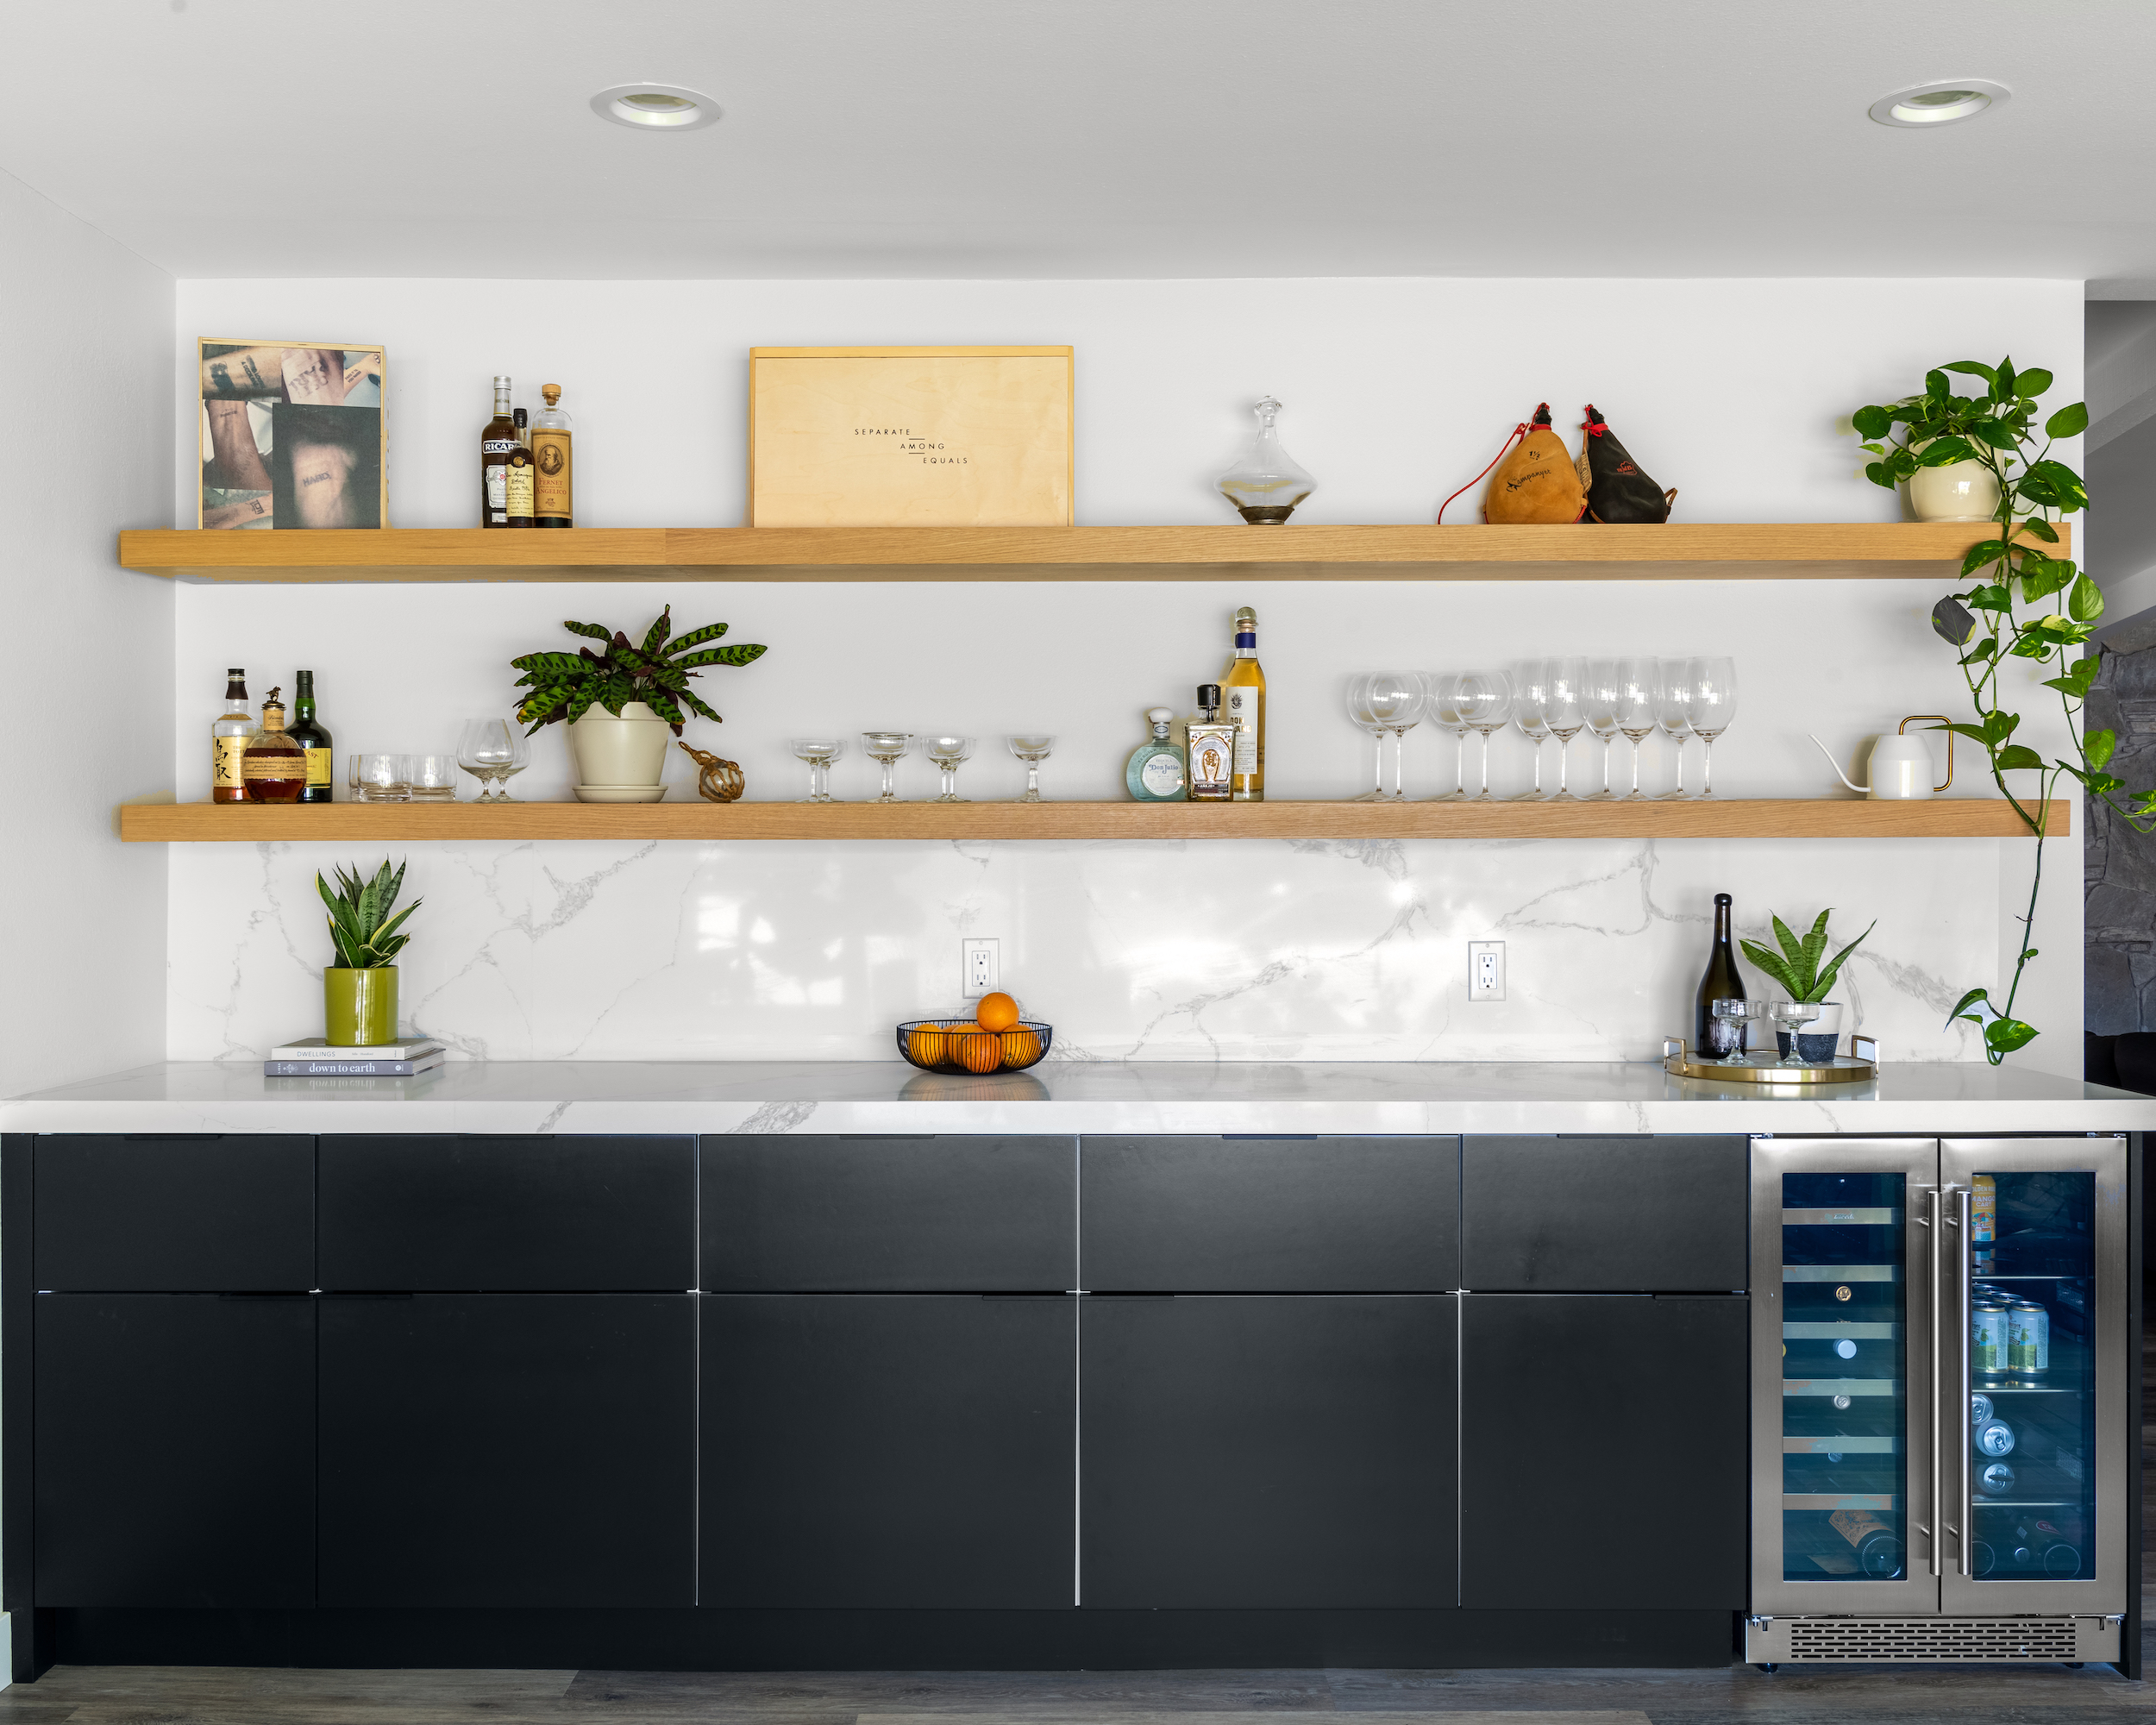 6 home bar ideas that branch out beyond the basic cart - semistories